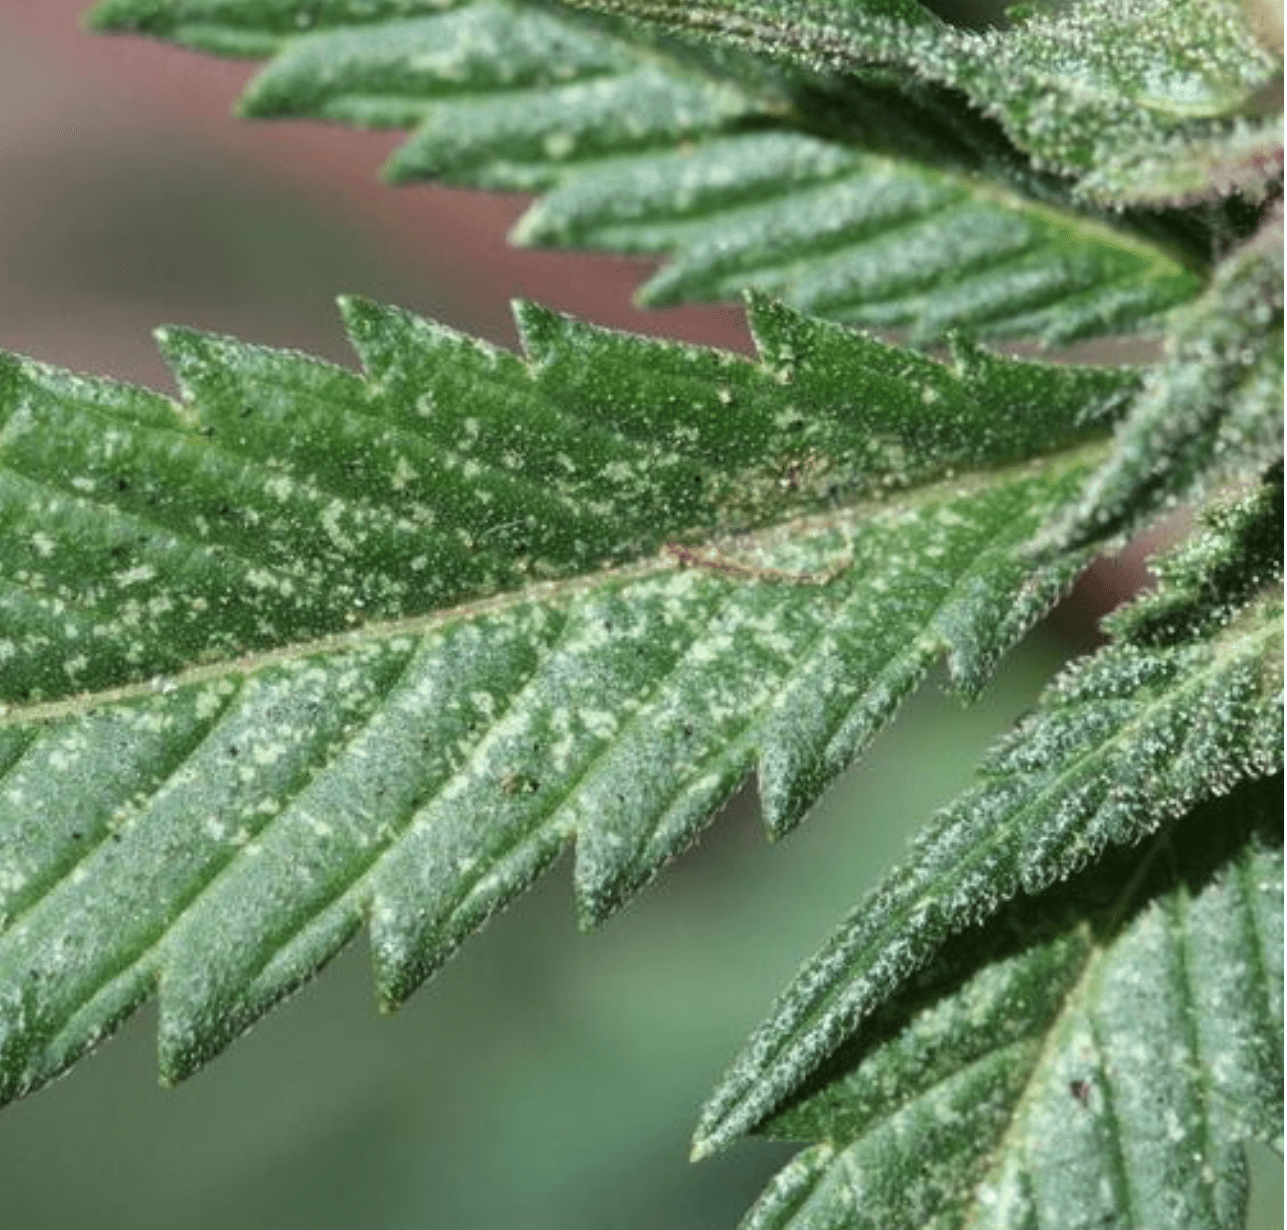 Spider Mite Damage on Cannabis Fan Leaves